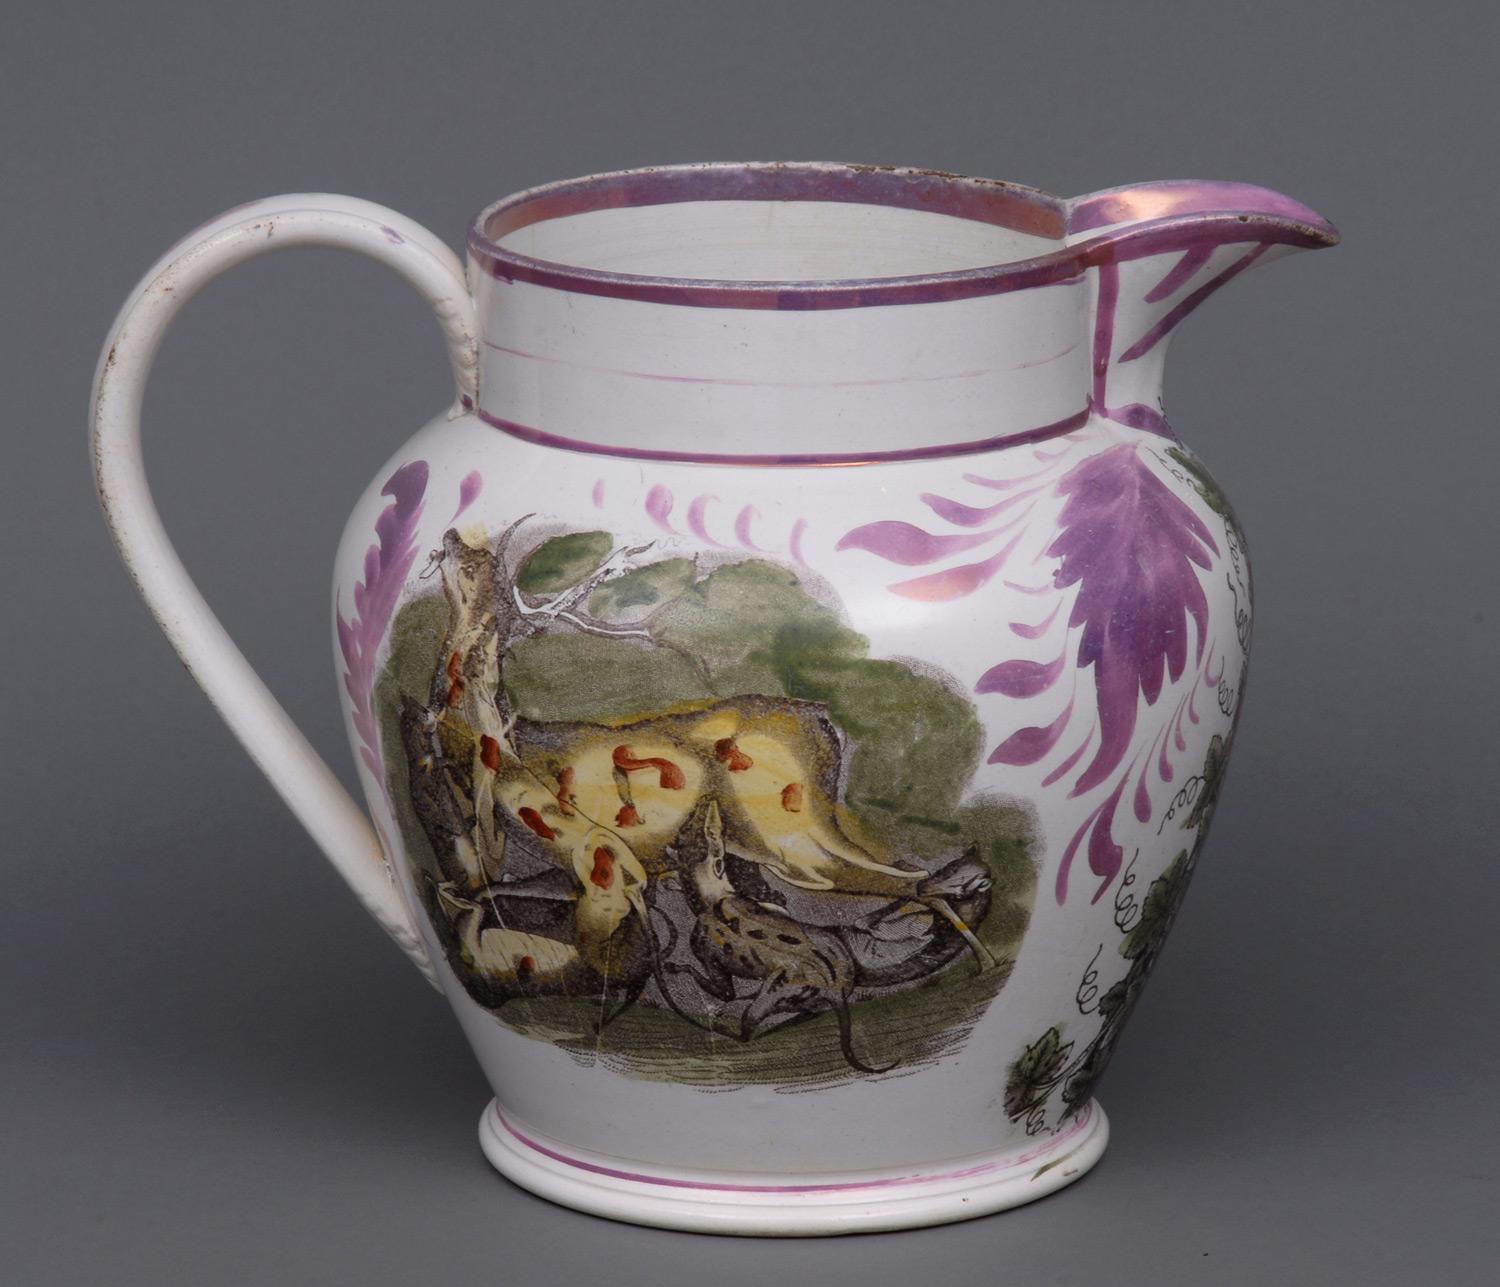 Large Sunderland pink lustre jug, decorated with hunting scenes on both sides: one side is of a figure of hunter and dog with a stag; the other side is of coyote and stag. Grapes, leaves and vines decorate the area under the spout.